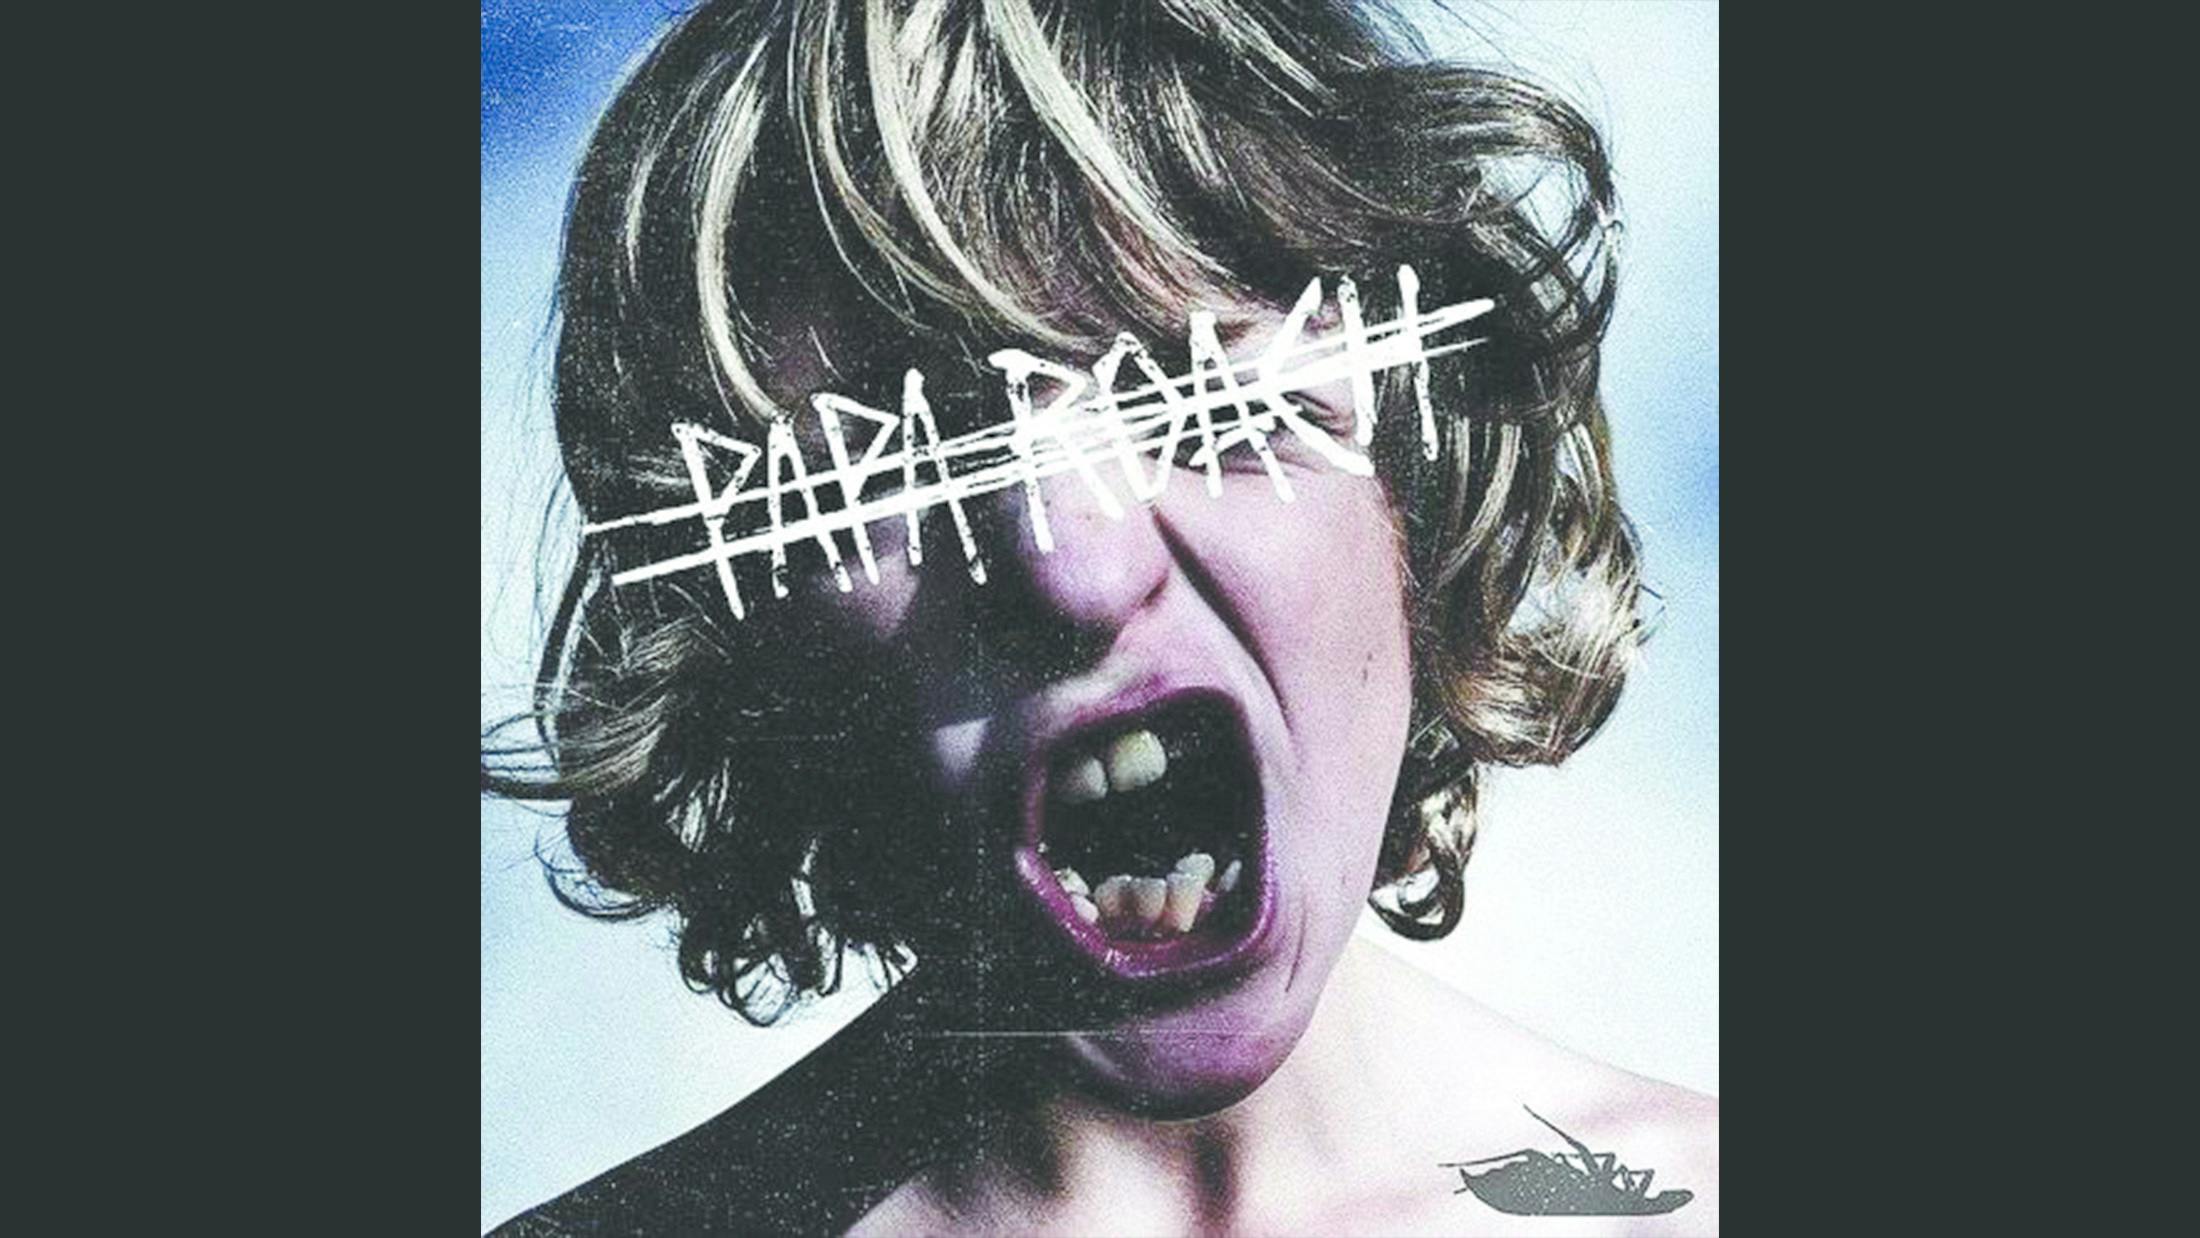 The key to a long life in music is to constantly move on, but ensuring you give your fans a ride in the process. Papa Roach are bigger and better today than in their supposed late-’90s heyday, and it’s due to clever, turbulent albums like this that incorporate ever-changing styles, penetrating lyrics and fearsome hooks.